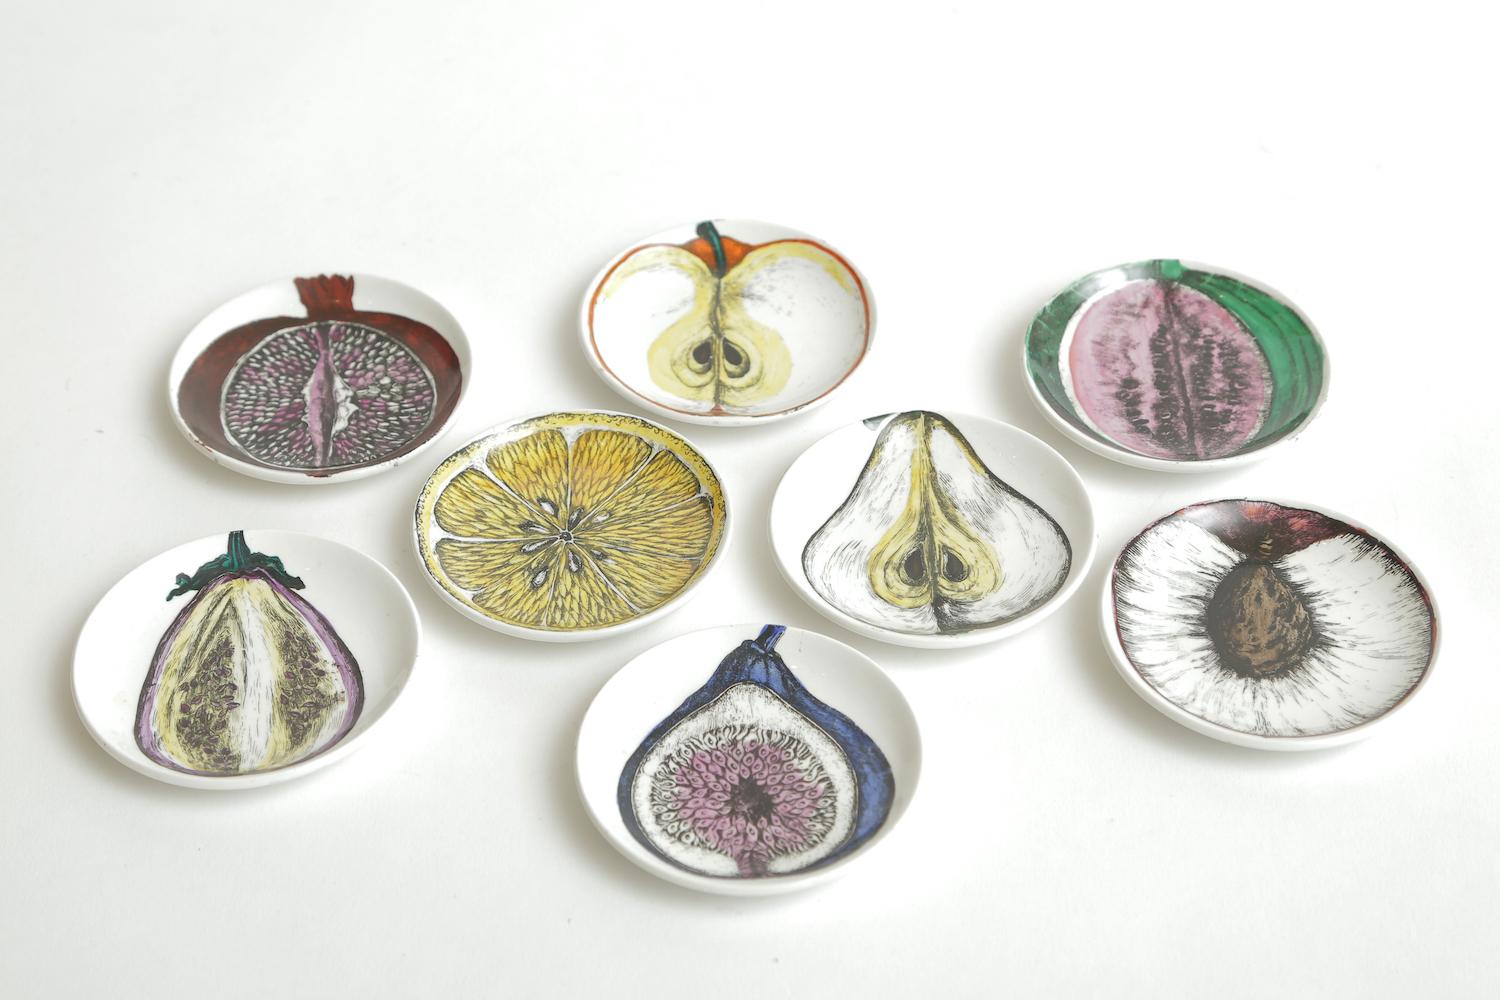 This very rare and perhaps never used complete set of 8 Italian Piero Fornasetti porcelain small plates or coasters are signed and titled Sezoni Di Frutta. They are Mid-Century Modern and in their original yellow box with the paper dividers from the